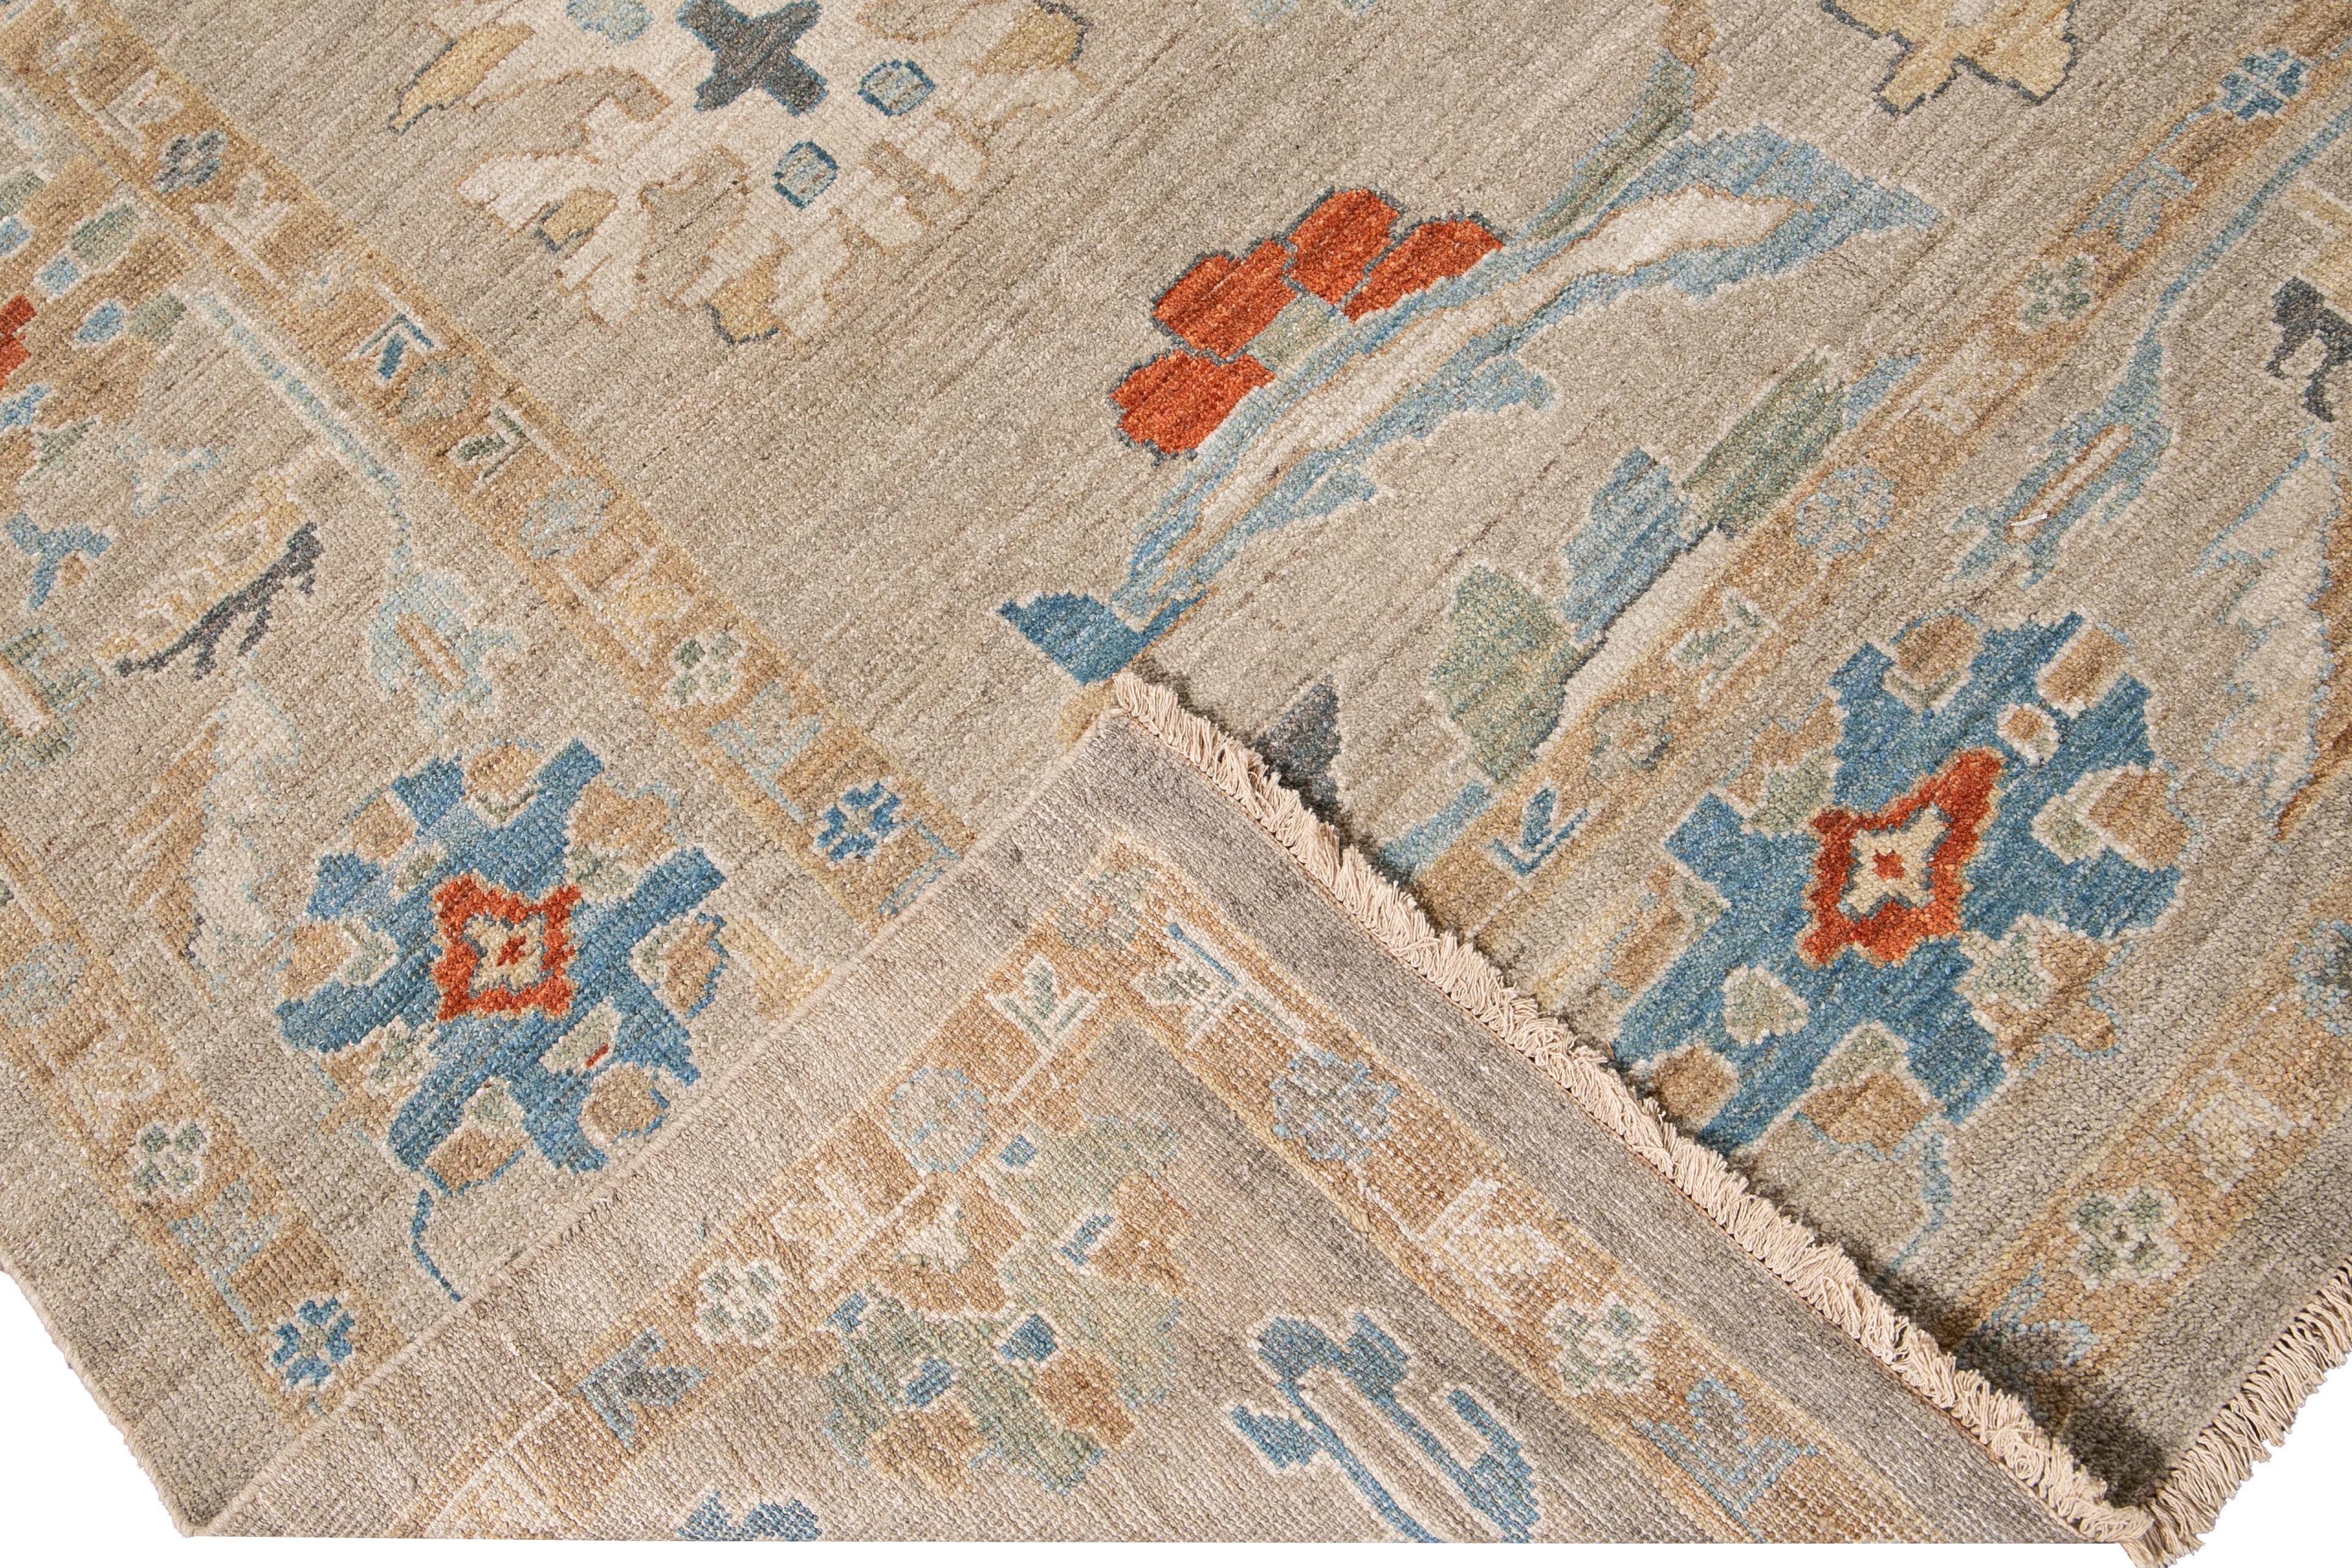 Beautiful modern Sultanabad hand-knotted wool rug with a tan field. This Sultanabad rug has an ivory, yellow, blue, and orange accent in a gorgeous all-over Classic geometric floral design.

This rug measures: 10'4